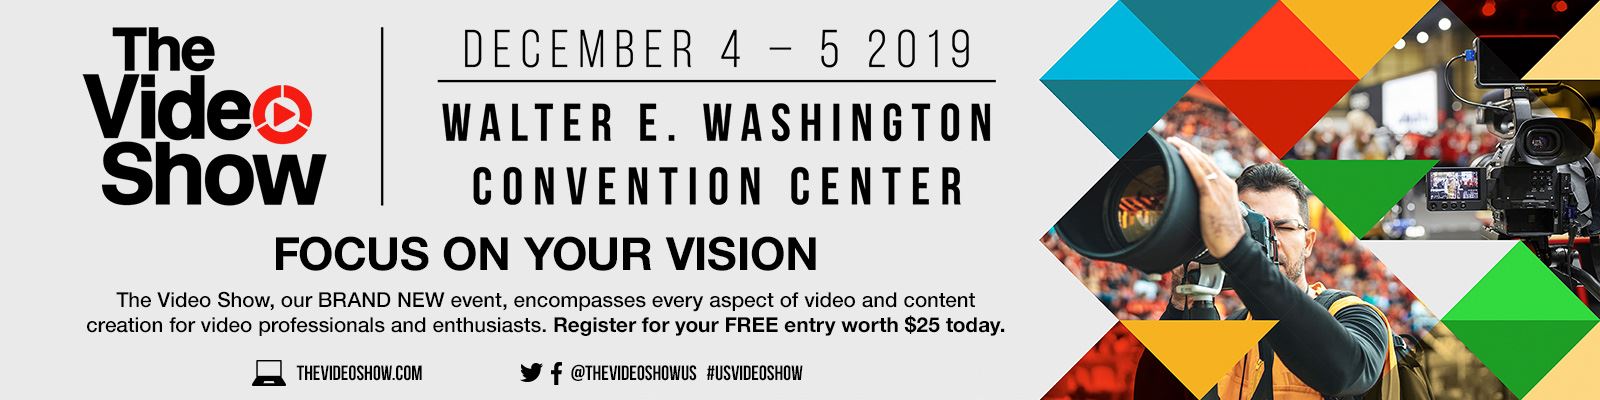 The Video Show 2019